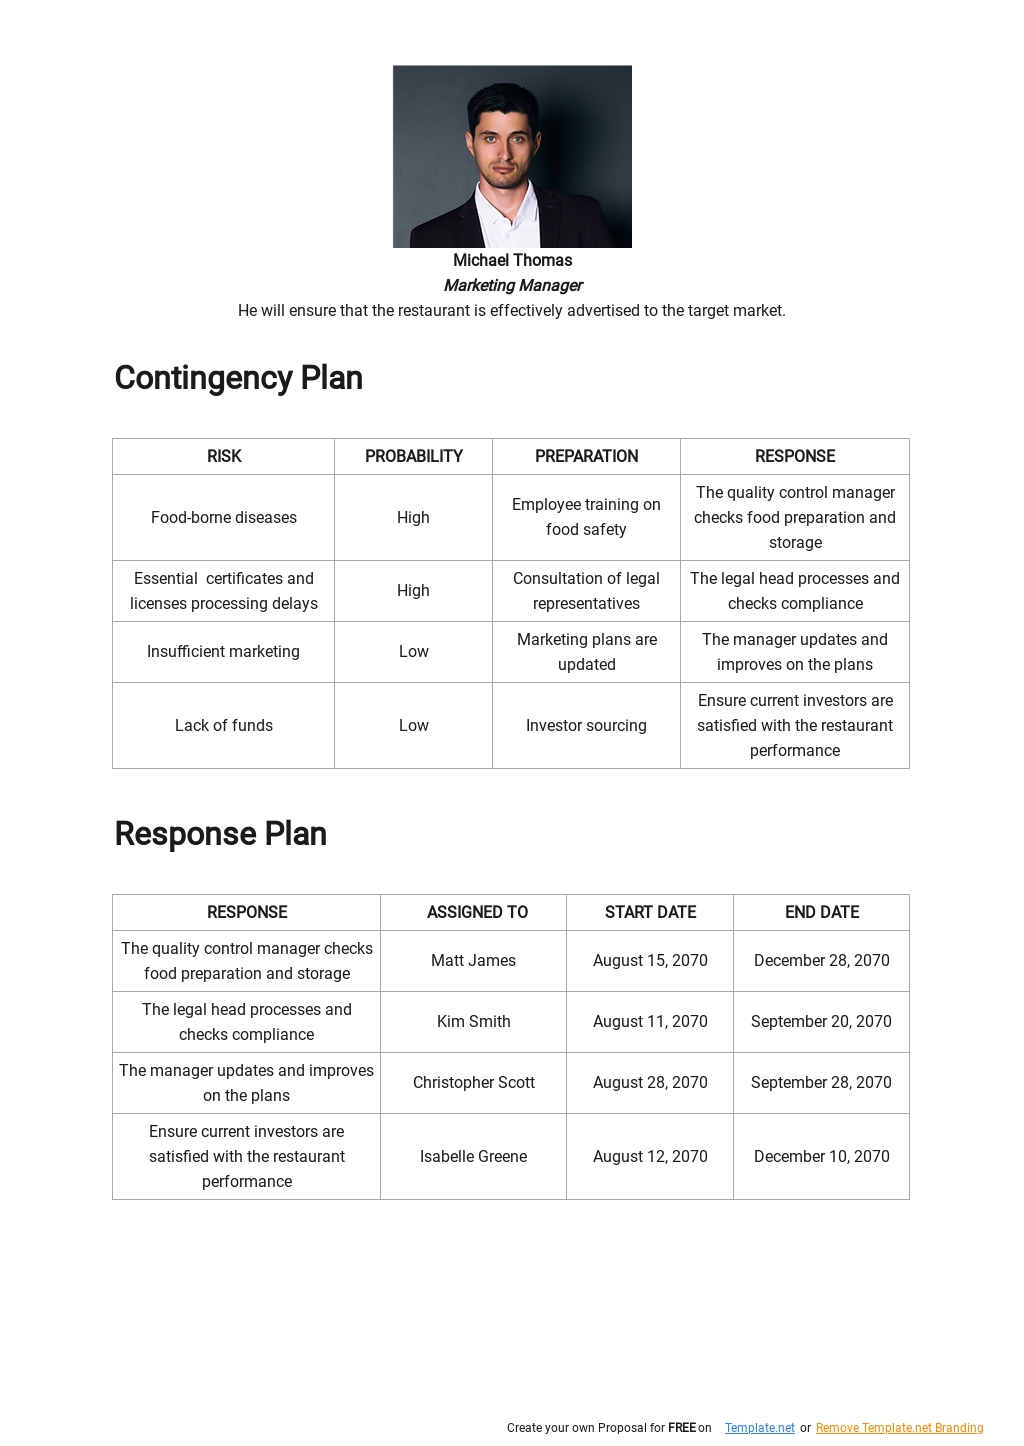 Service Business Contingency Plan Template  2.jpe